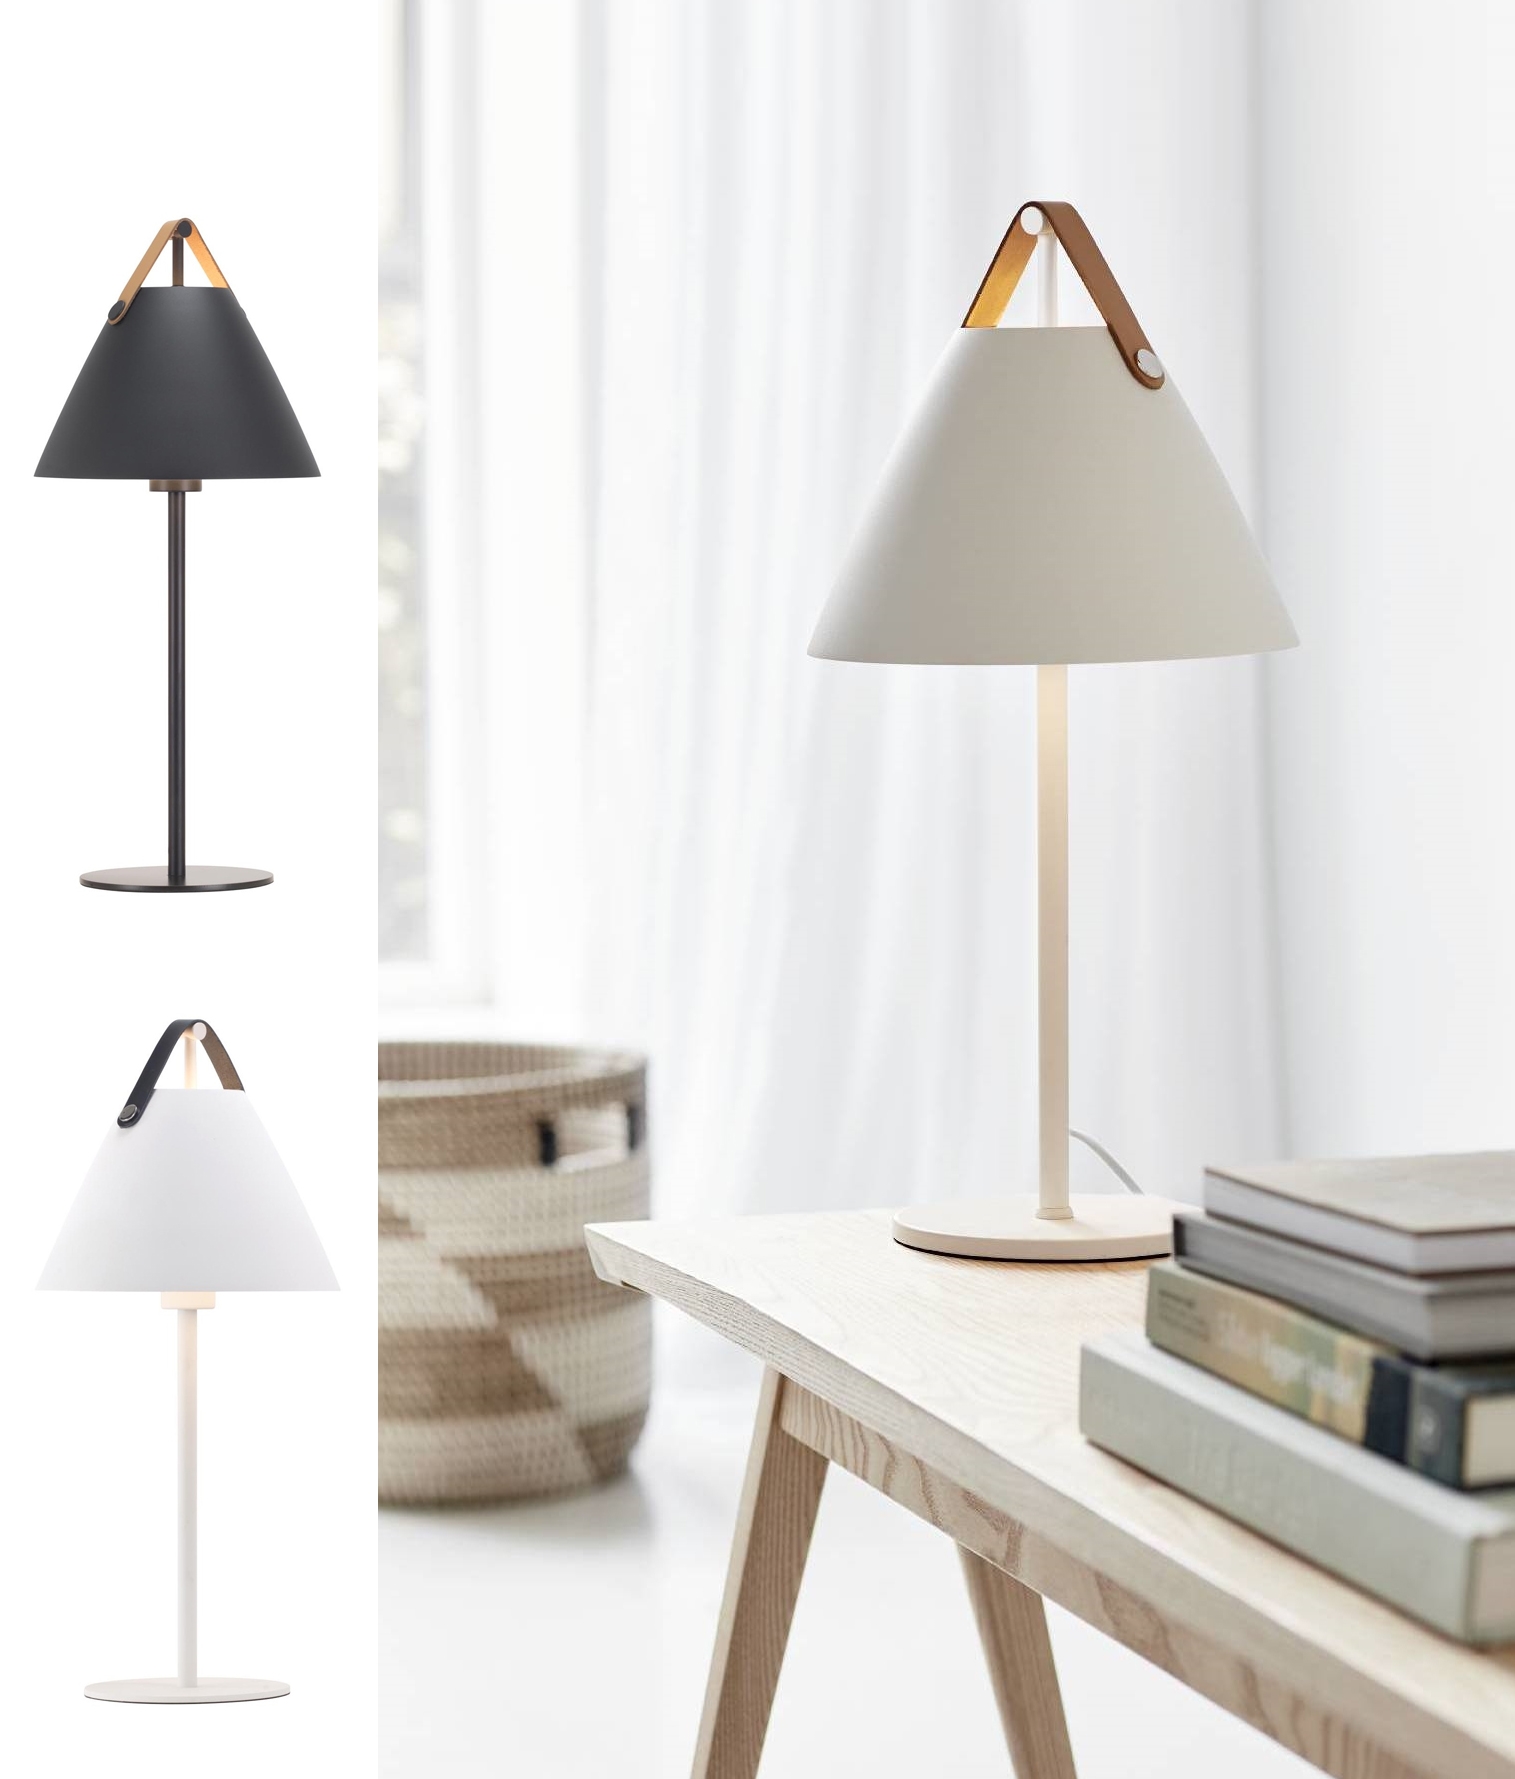 Metal Table Lamp With Leather Strap, Metal Table Lamps Uk